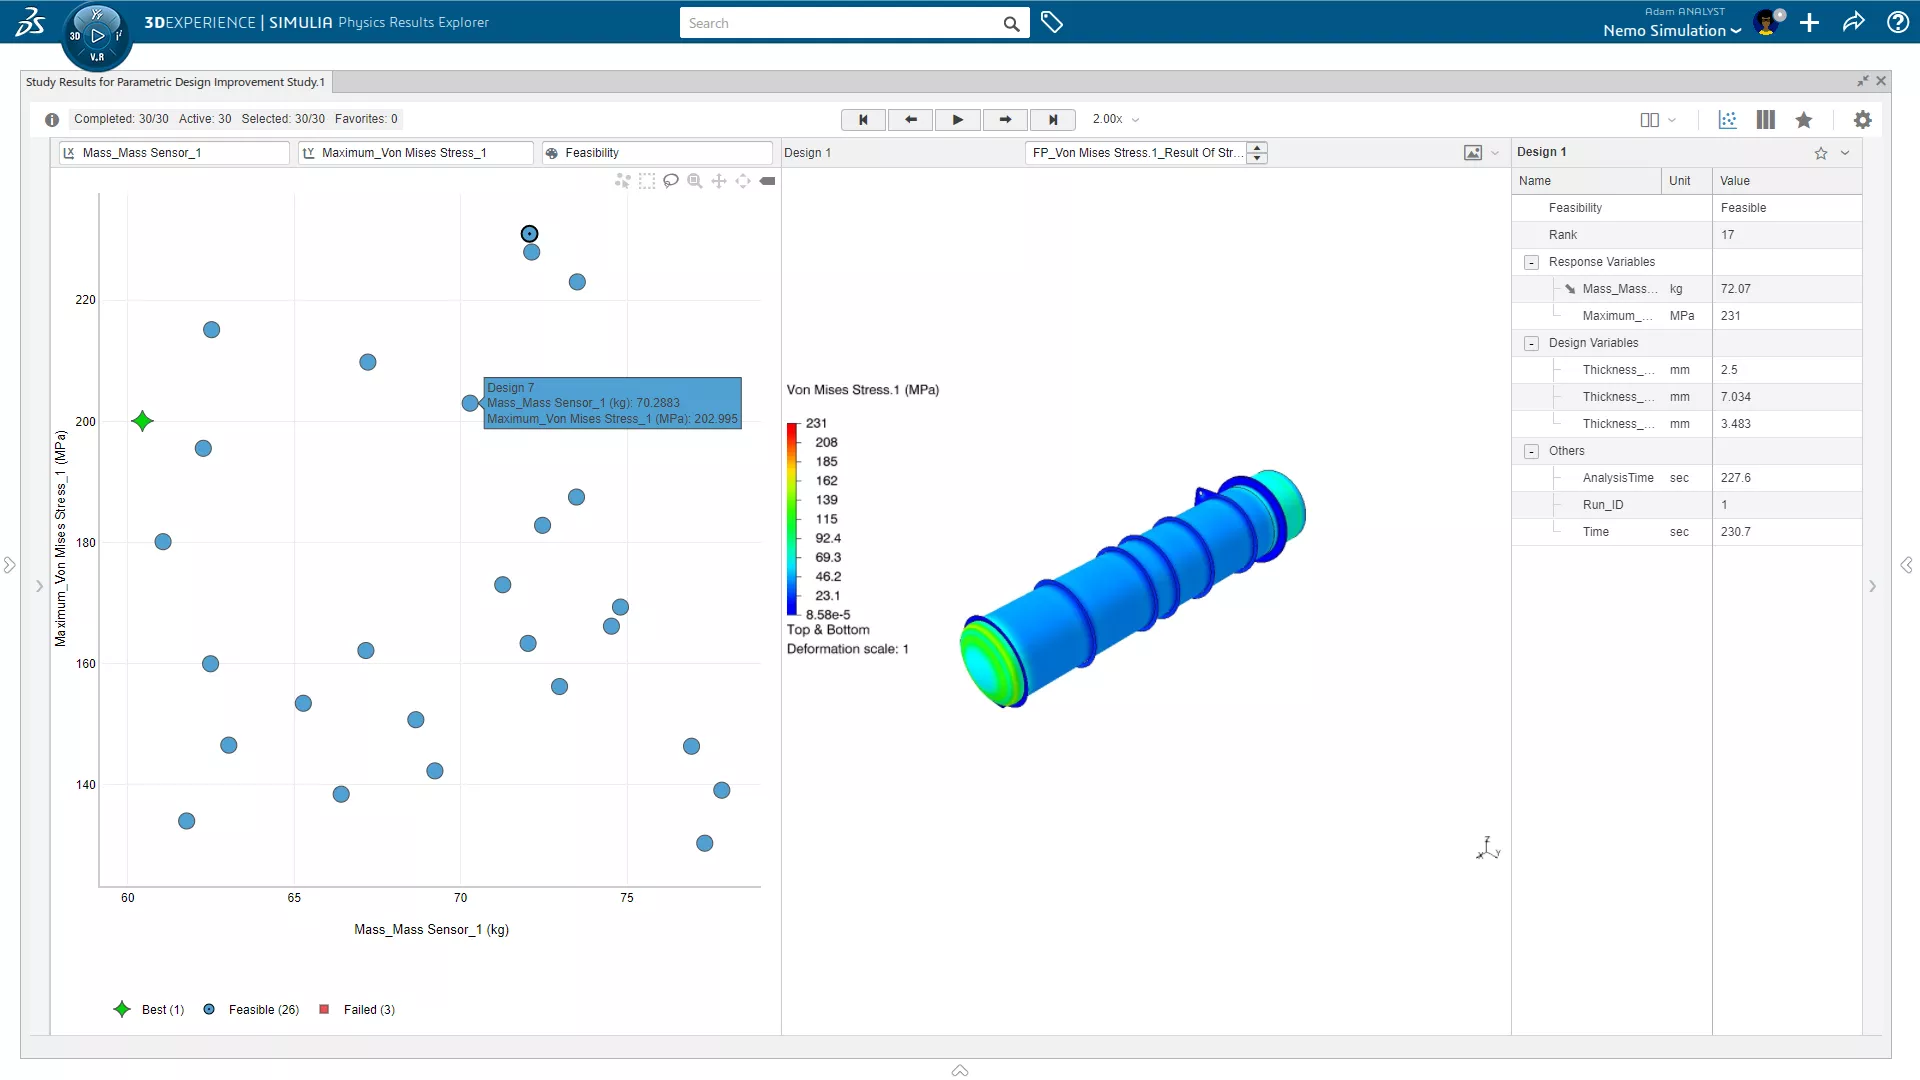 A design study of 30 alternatives using the optimization capabilities that come with the 3DEXPERIENCE STRUCTURAL FEA solution